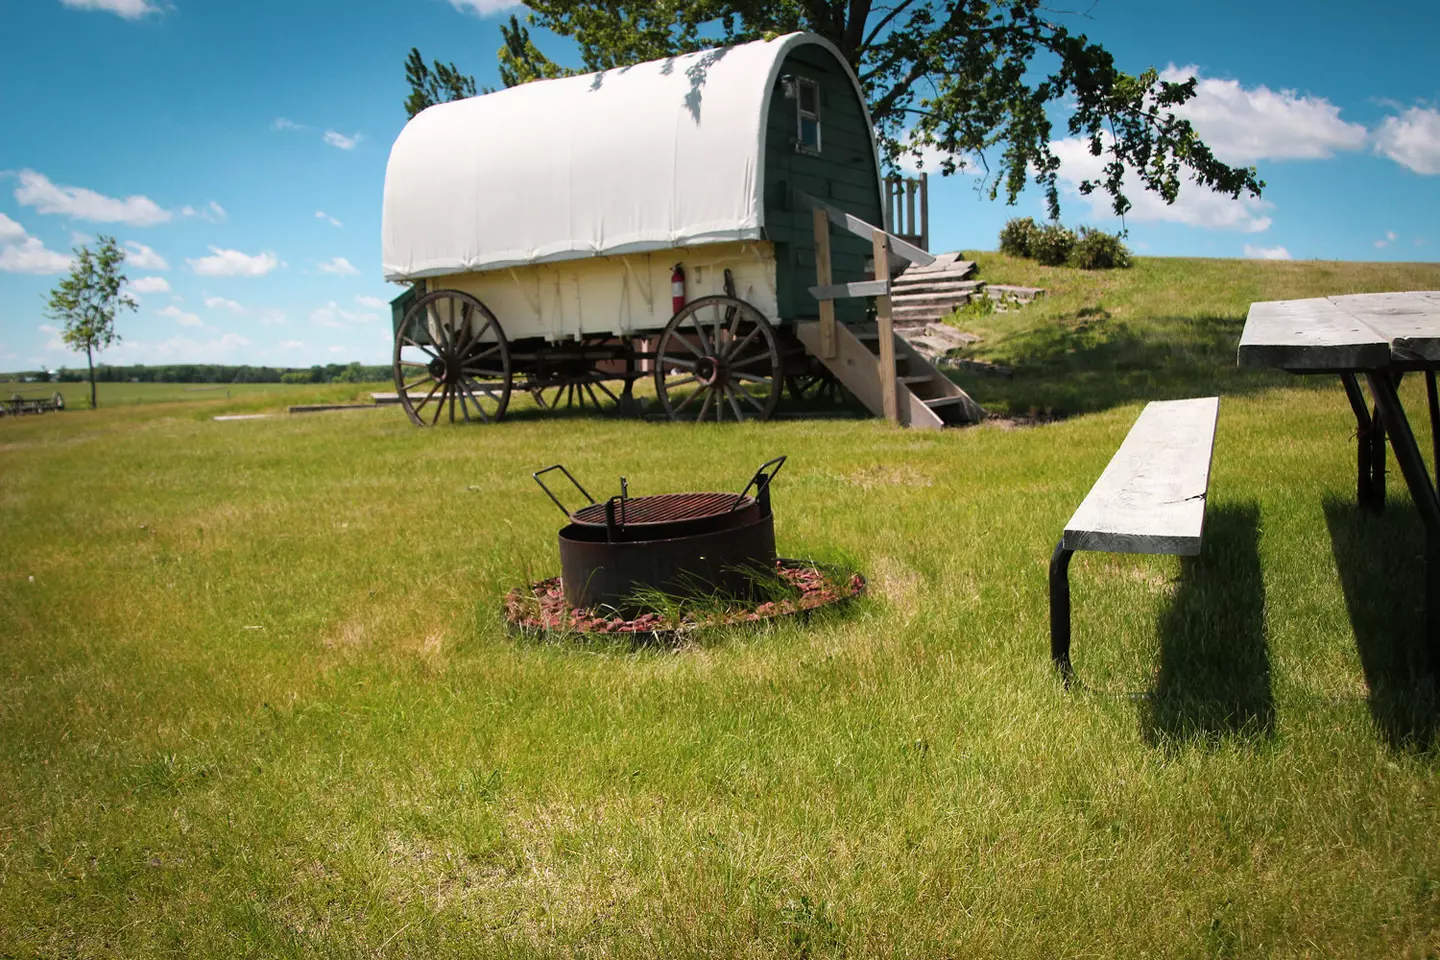 Covered Wagon at Ingalls Homestead in De Smet, SD